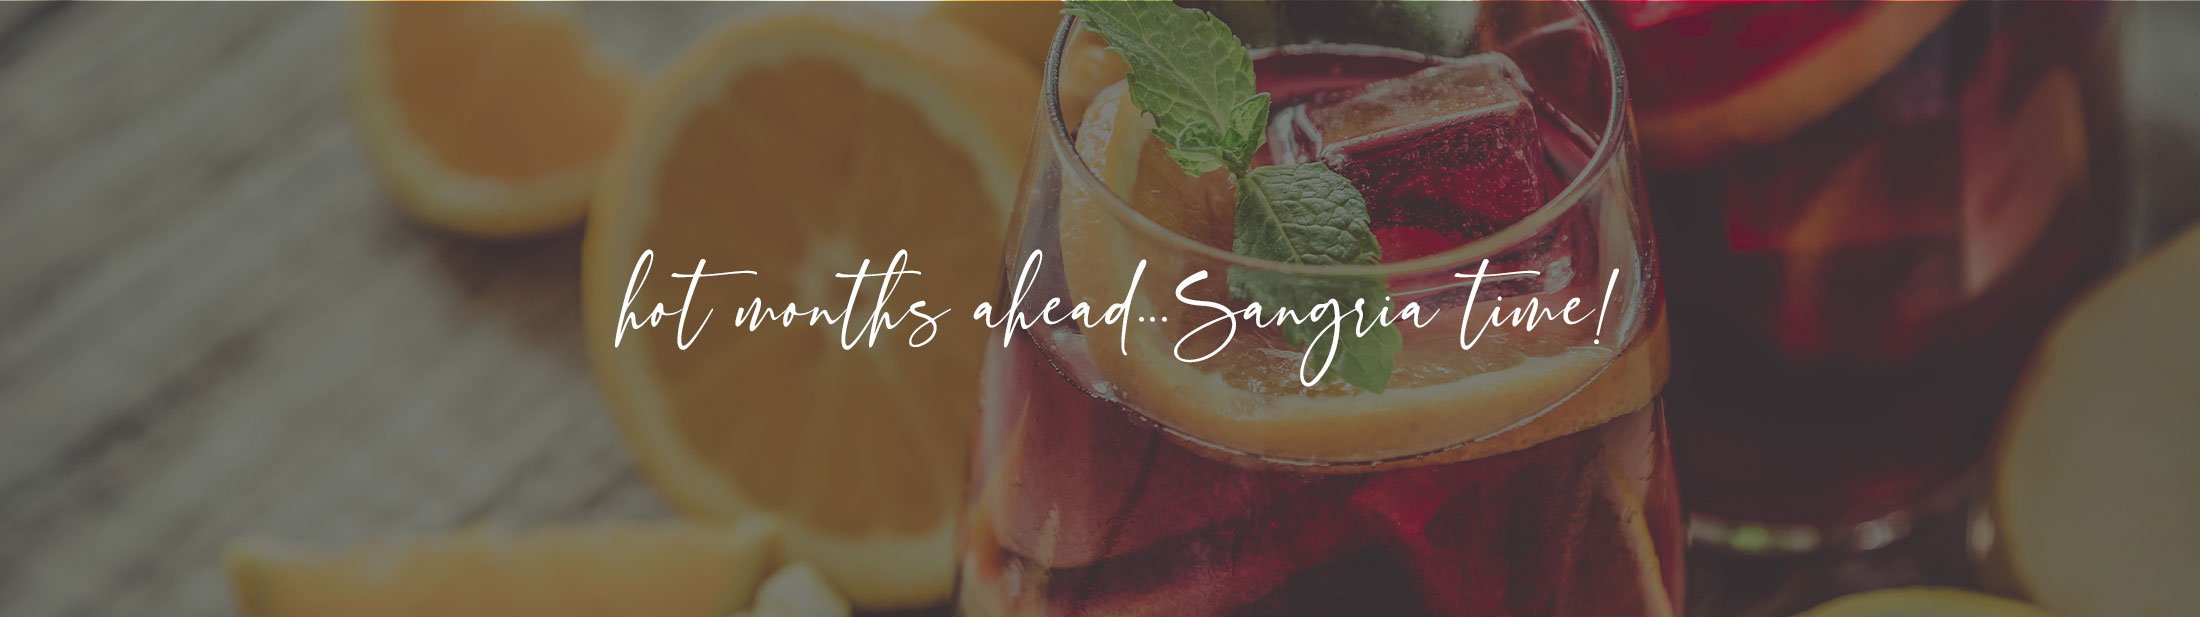 Hot months ahead... it's Sangria time!